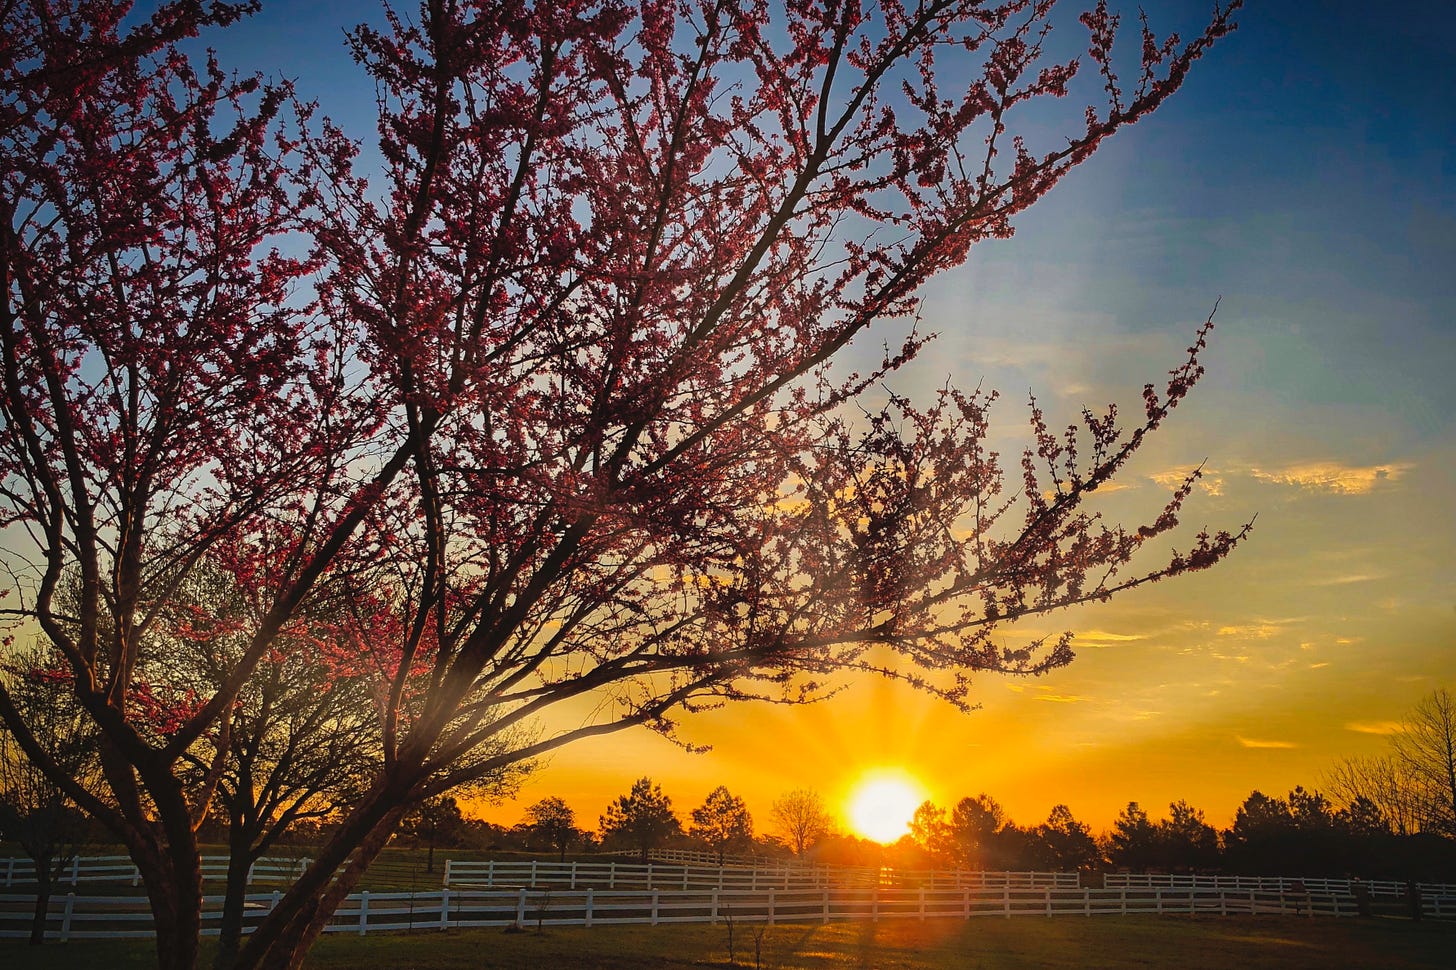 The sun rising just above the horizon with beams styretcing across the sky and a blooming Red Bud tree on the right